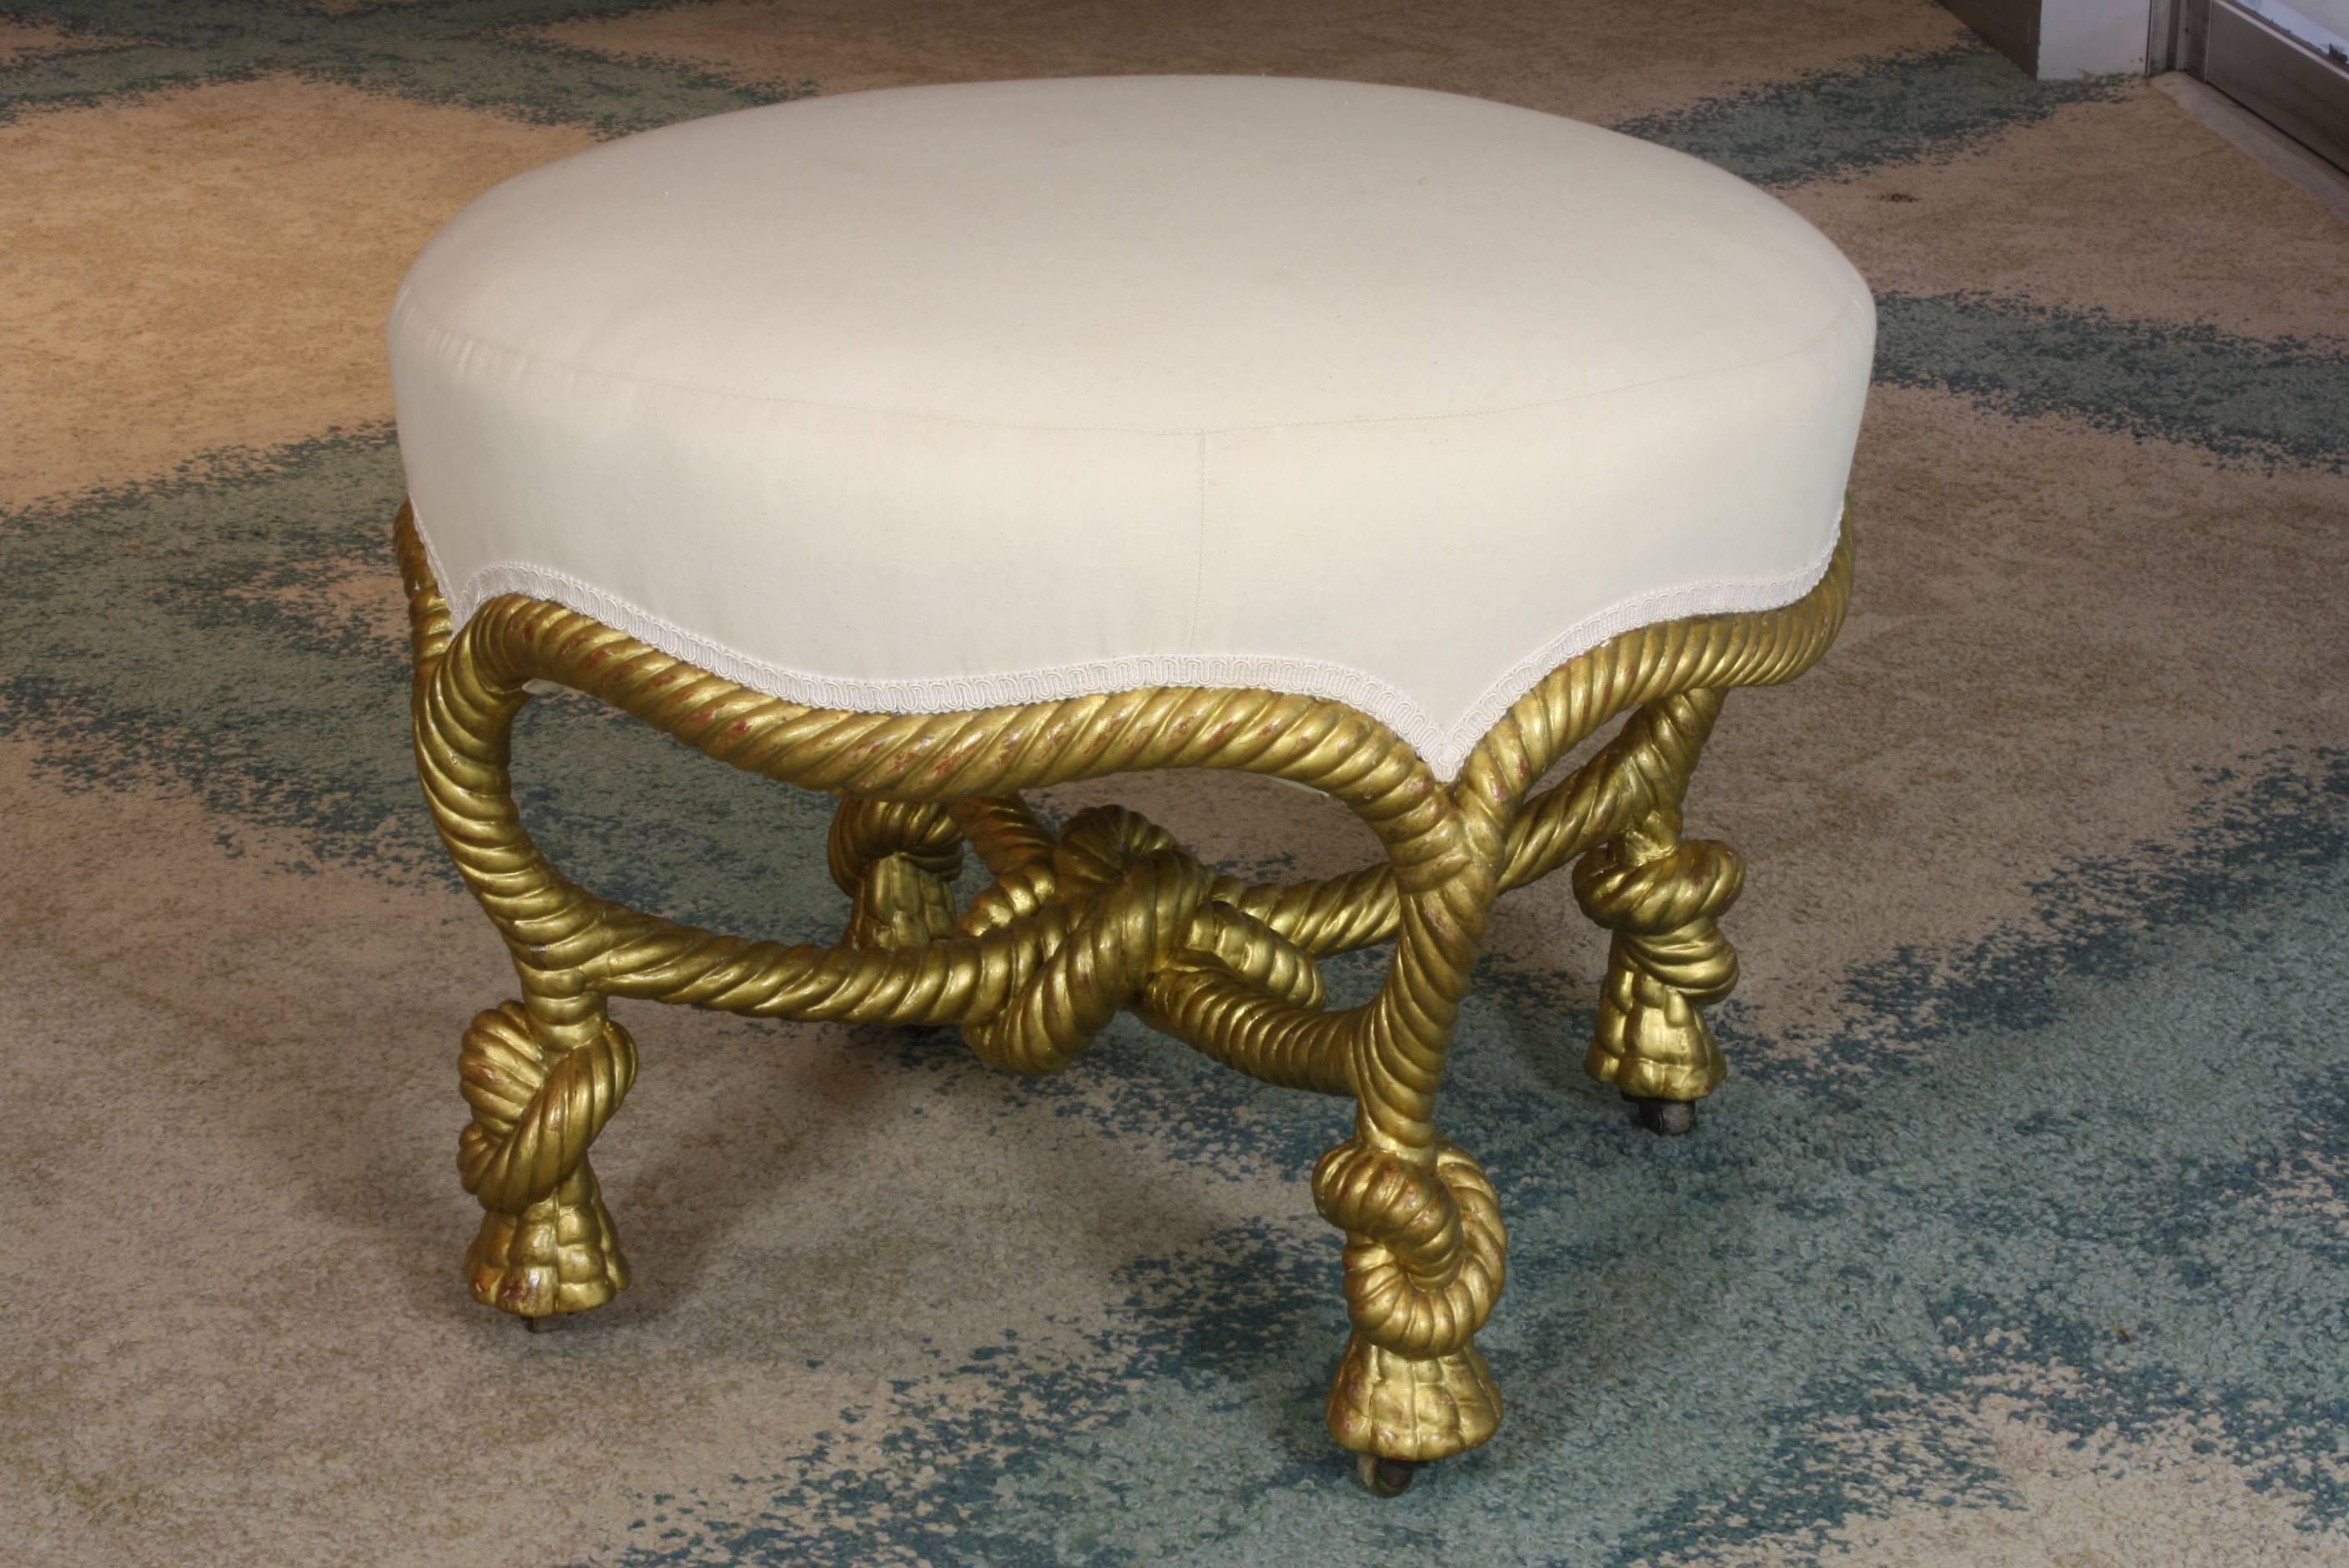 A lovely French, Napoleon III period French giltwood knotted rope tabouret or ottoman with bone casters in the manner of A.M.E. Fournier (circa 1860). This piece has been carefully restored, with the springs being restrung and restuffed, and covered